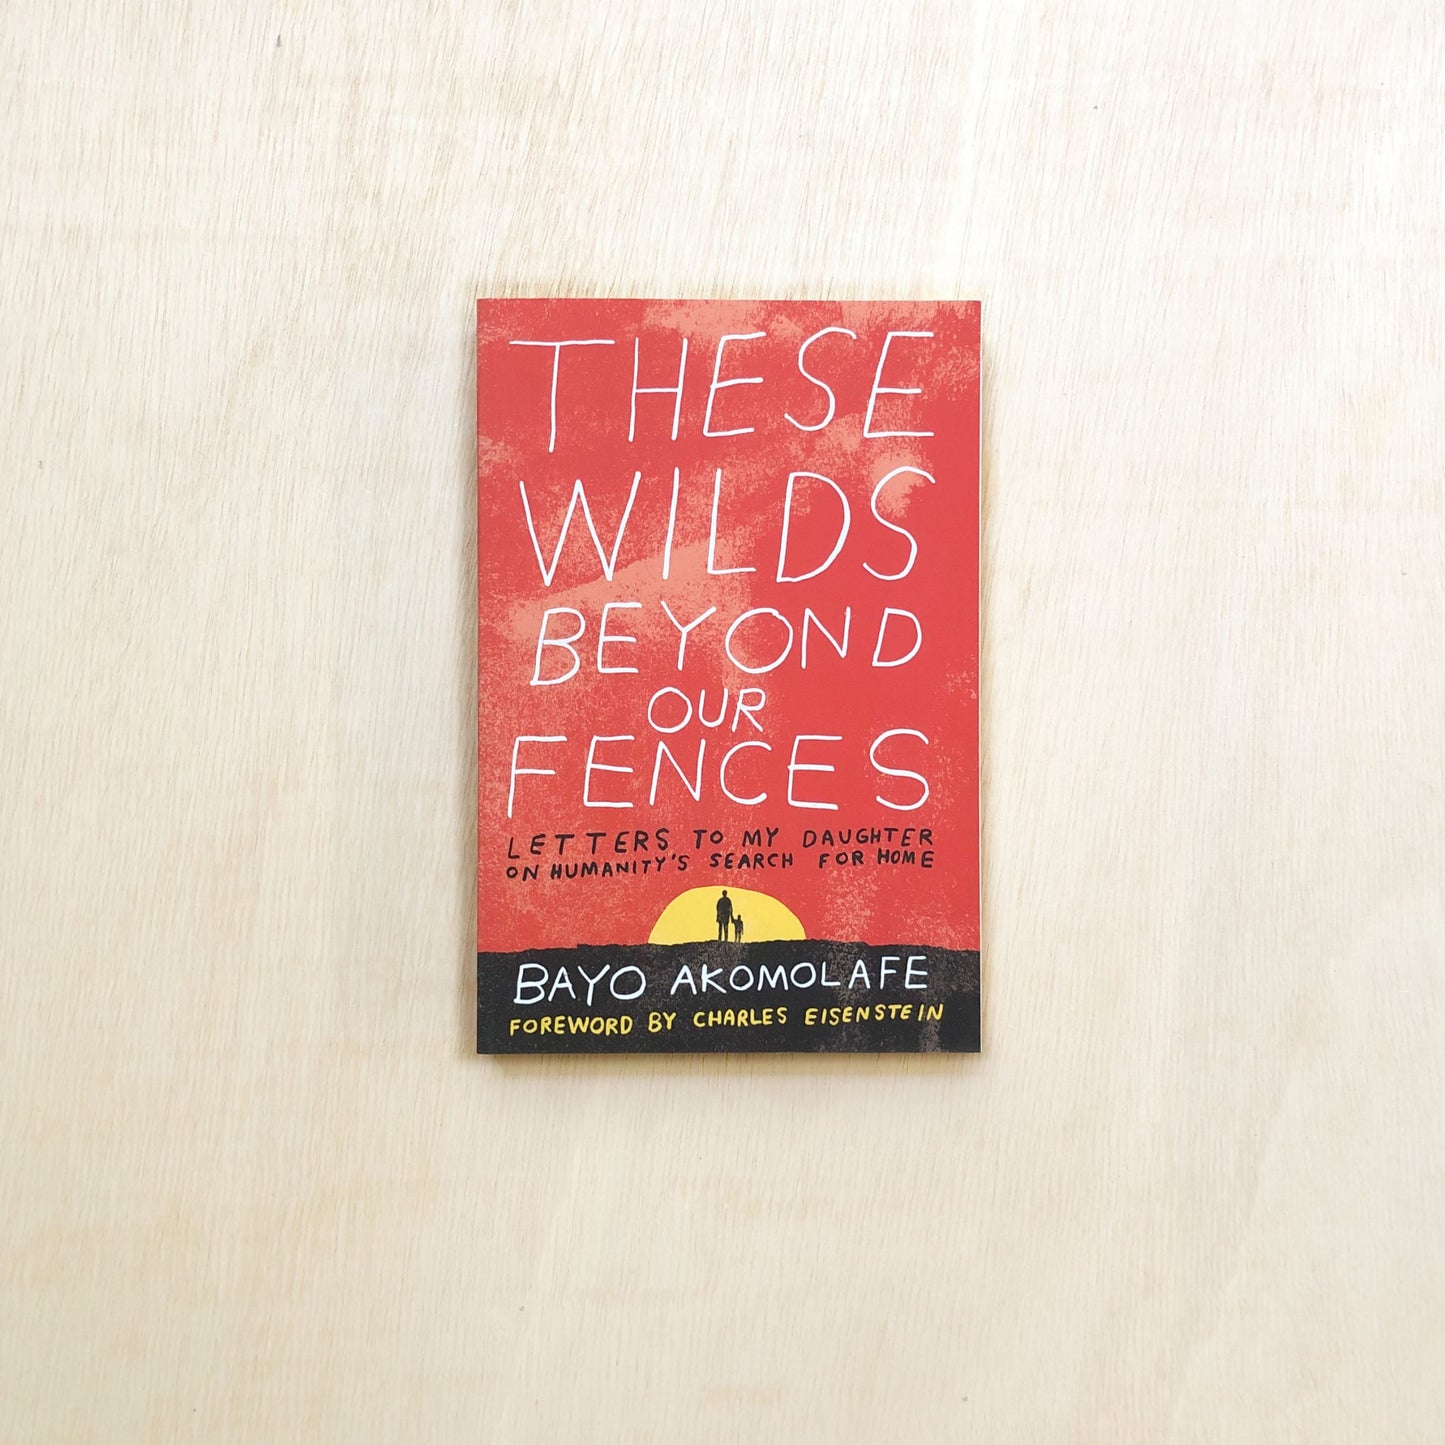 These Wilds Beyond Our Fences - Letters to My Daughter on Humani